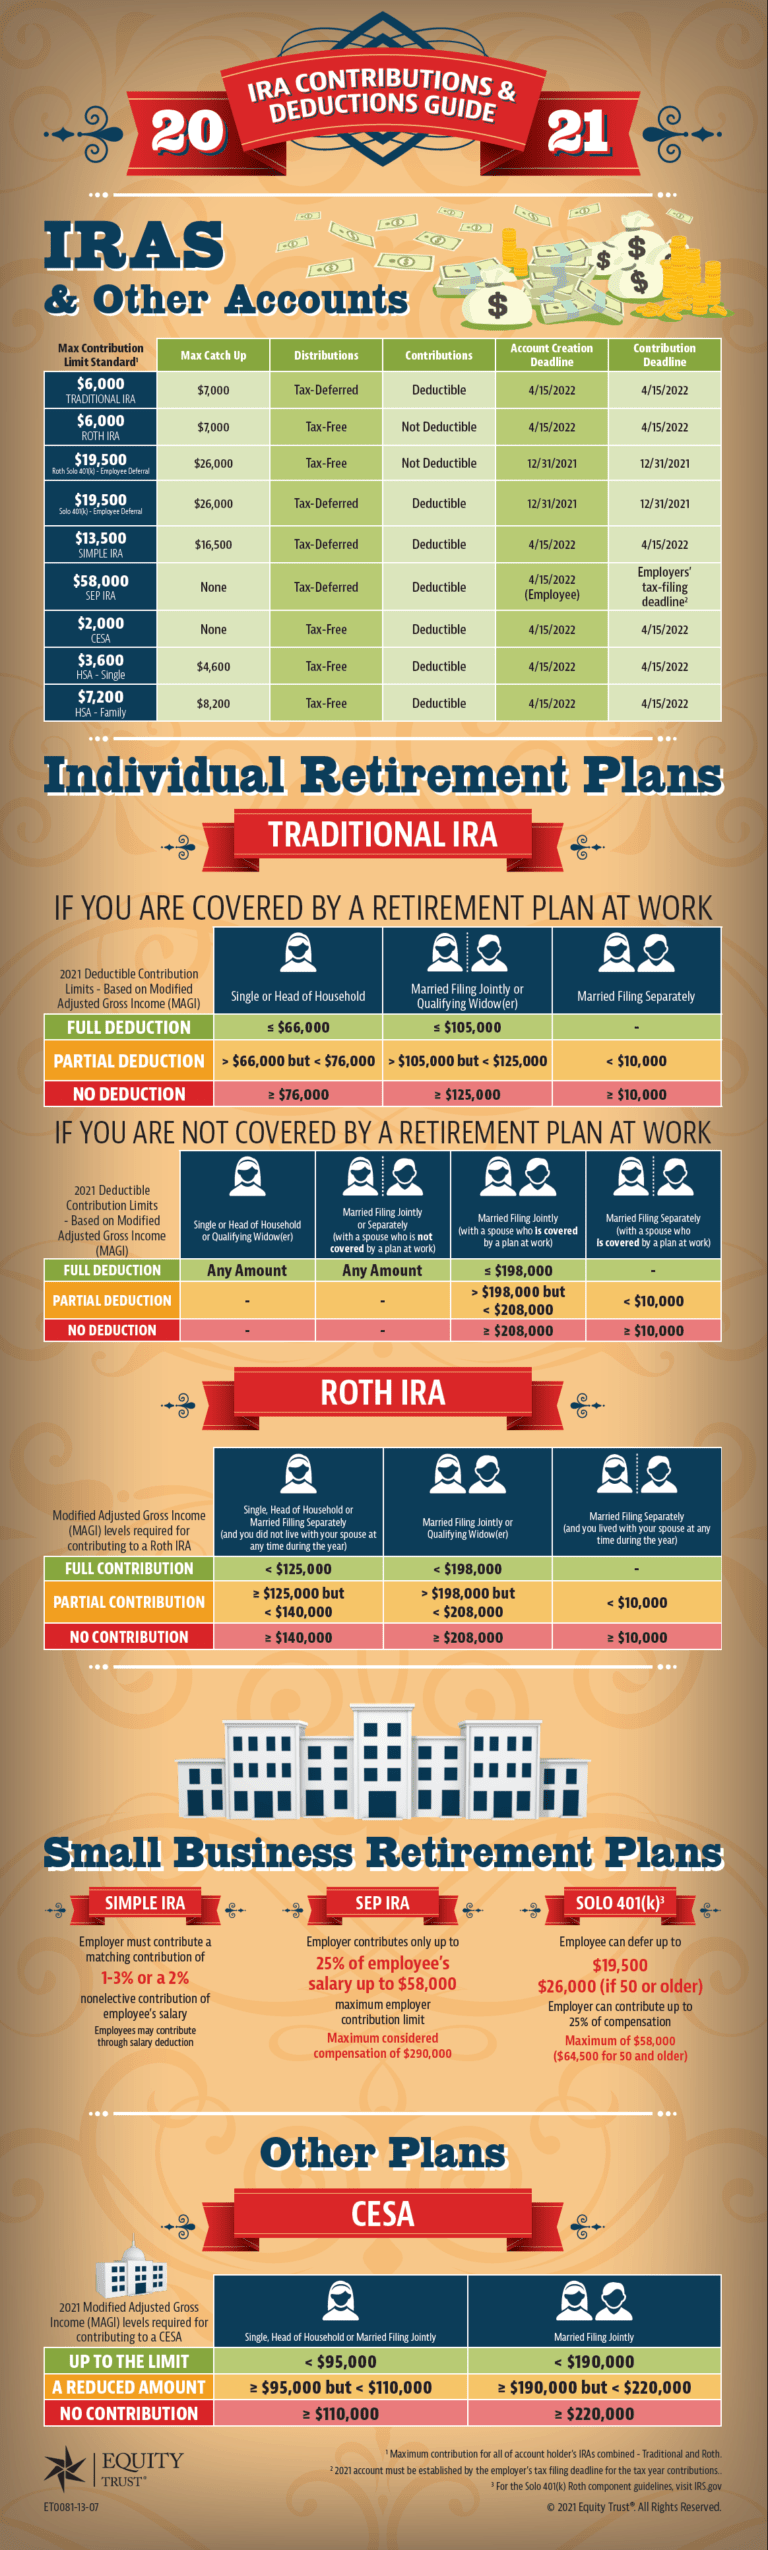 IRA Contributions and Deductions Guide for Year 2021 Infographic